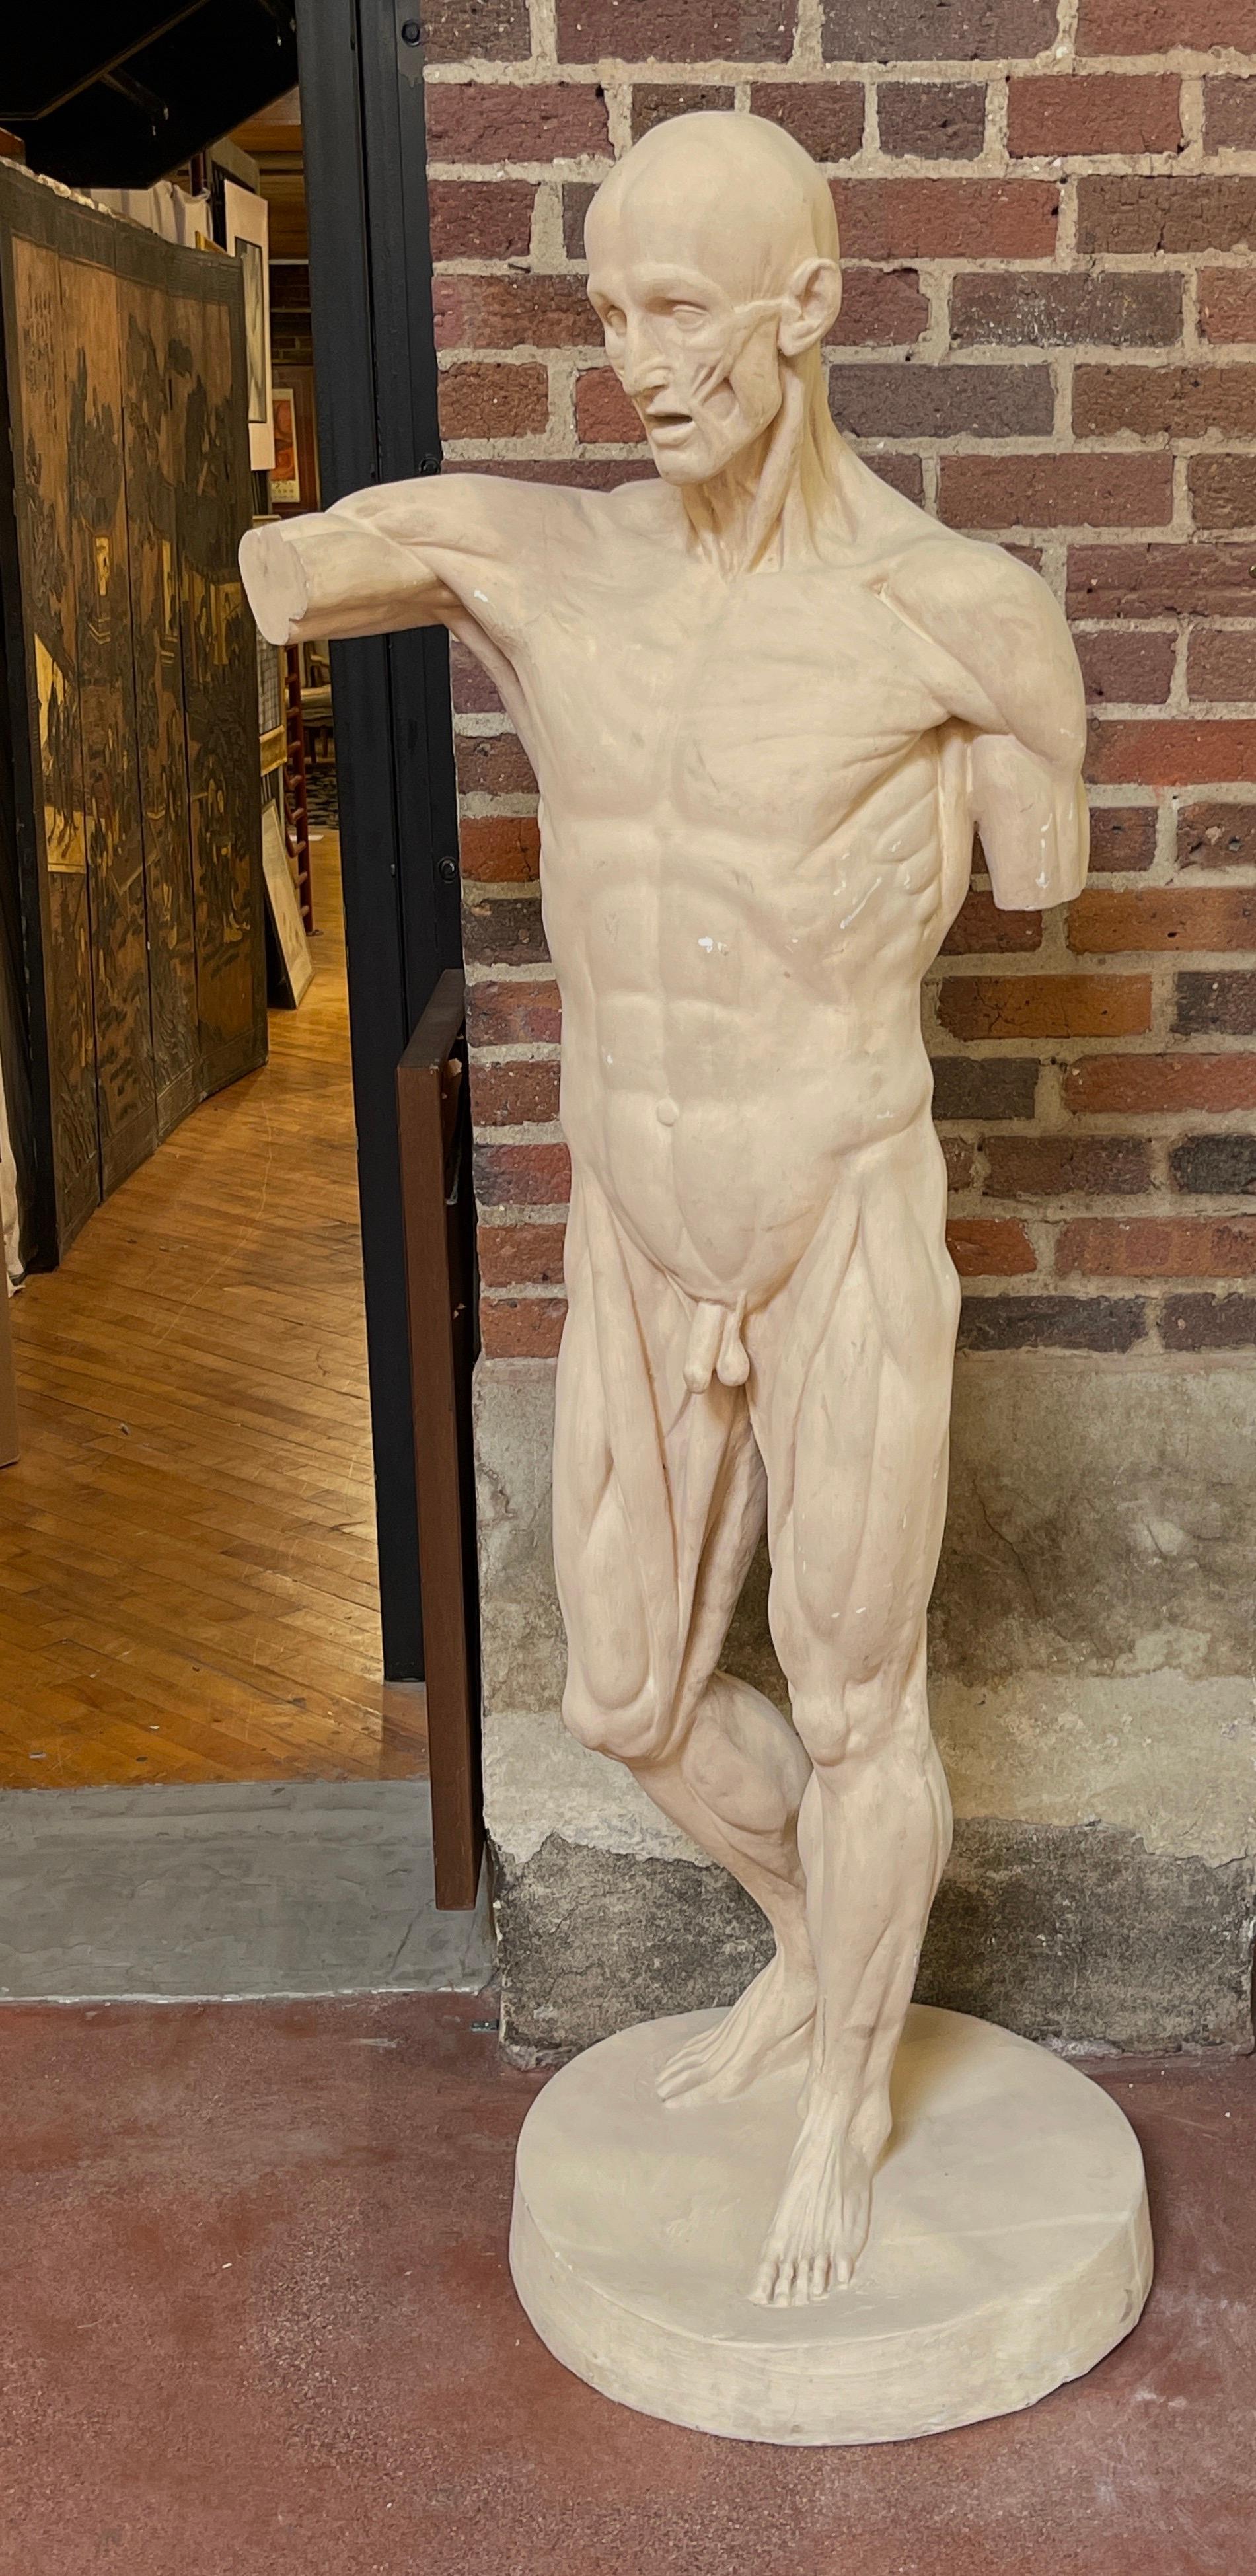 Life Size Anatomical Study of Flayed Male L'ecorche after Jean-Antoine Houdon
USA, 20th Century , Variant of  'Anatomical Man No. 3' 

History
There are numerous versions of  Anatomical Study of Flayed Male L'ecorche by Houdon, also know as Anatomy